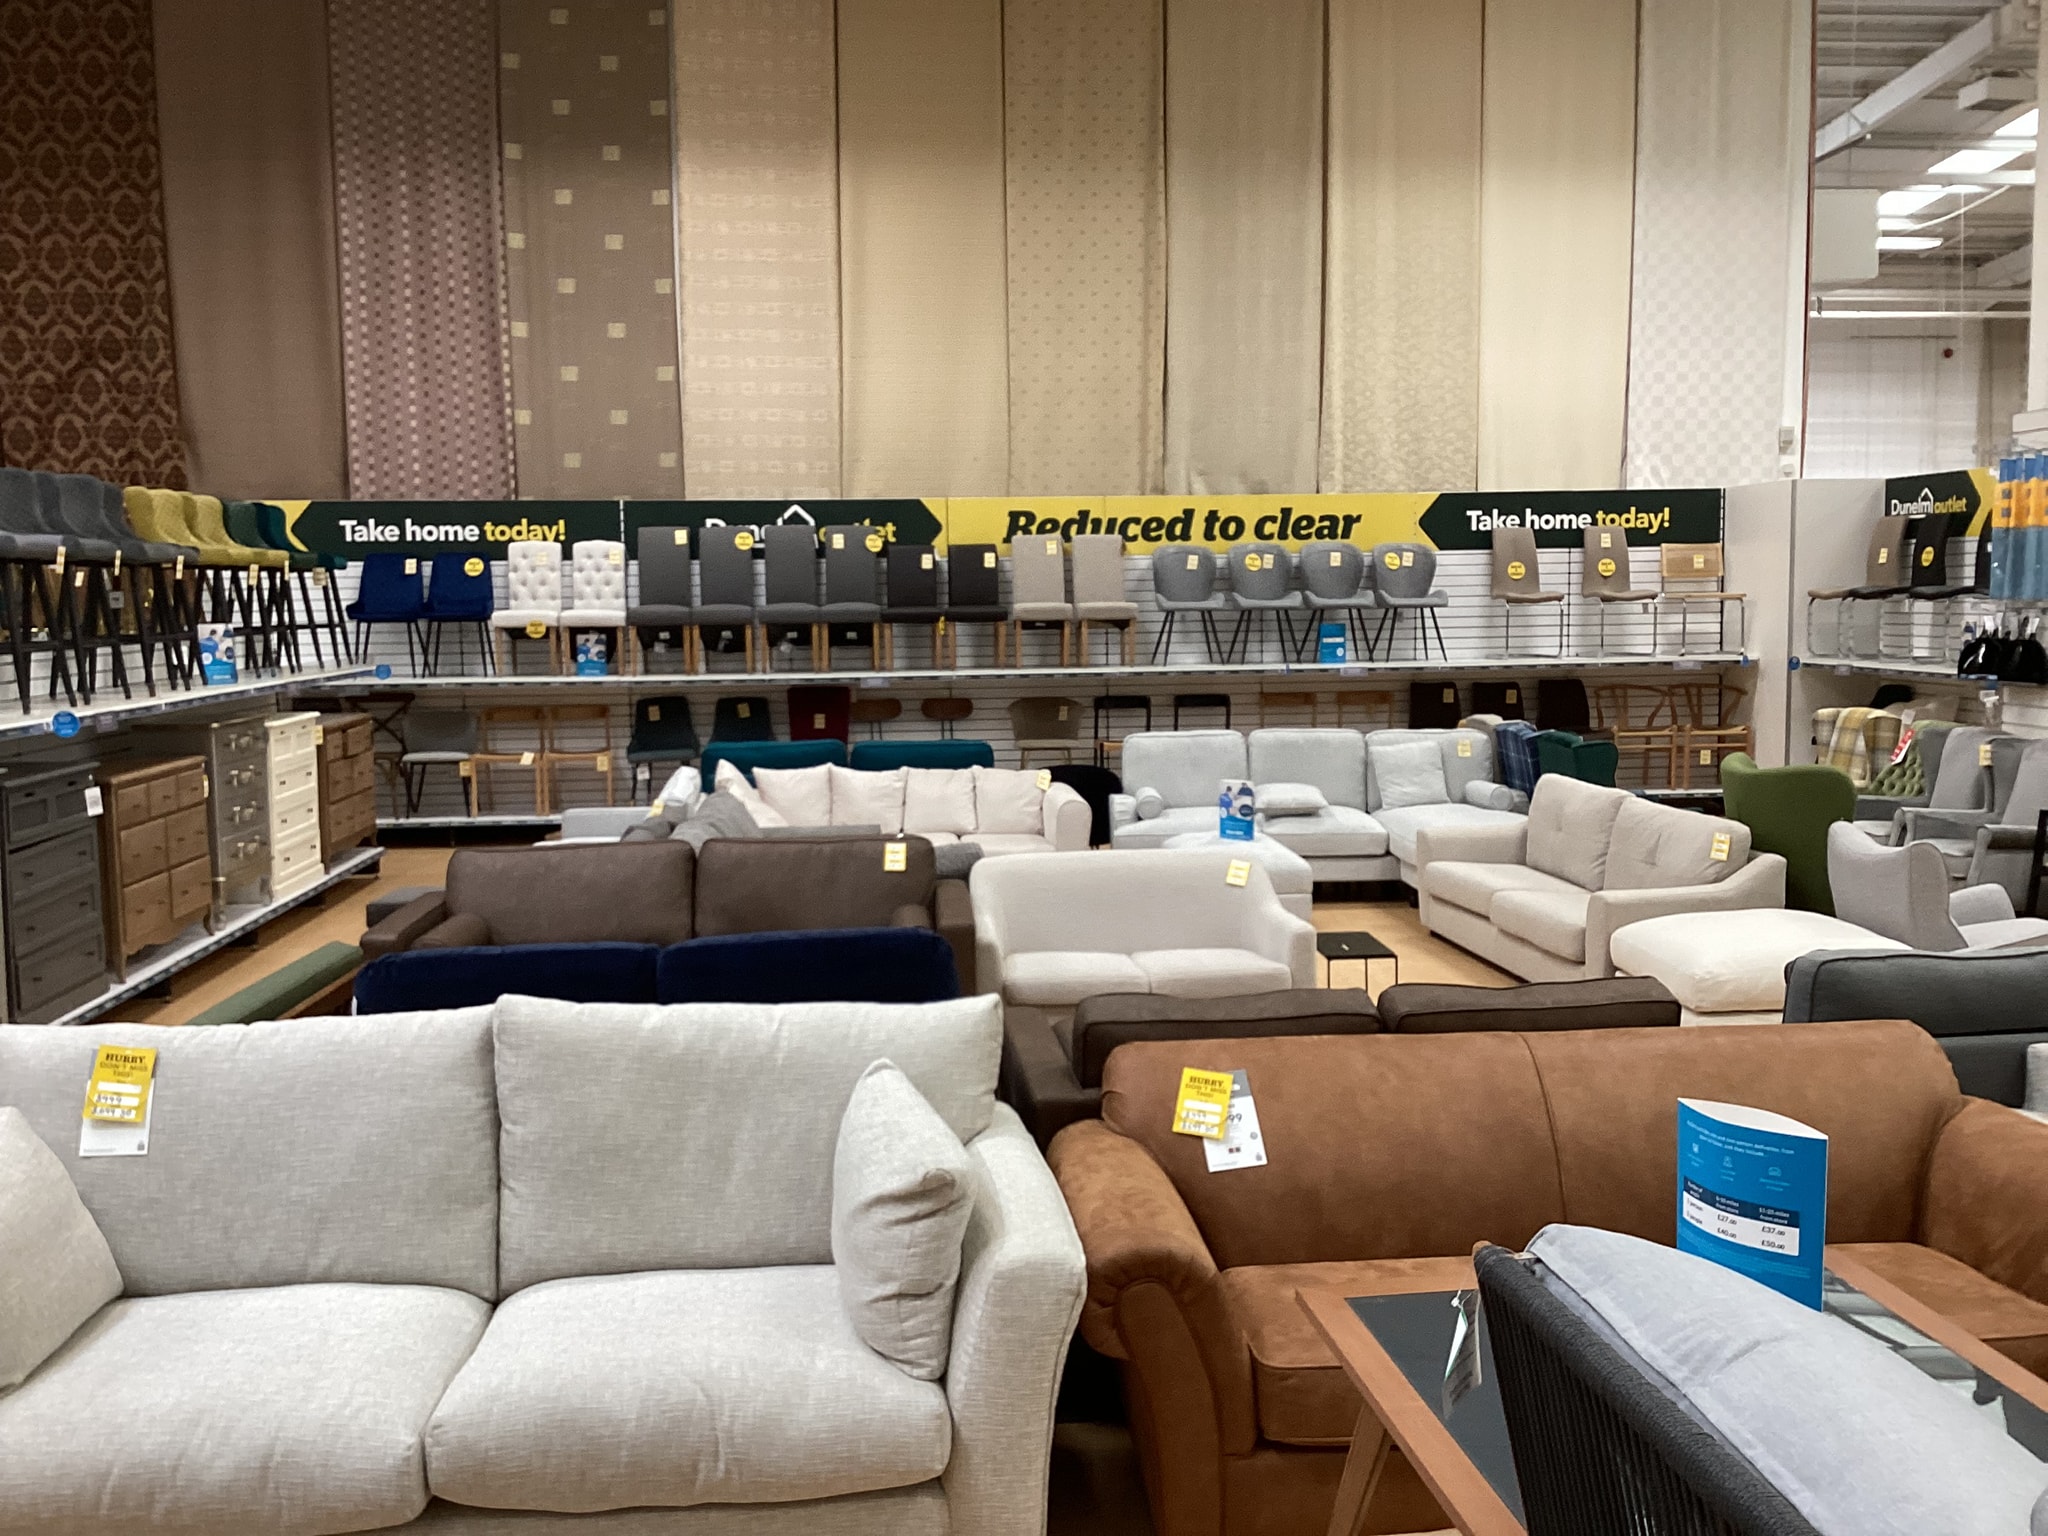 Inside the new Dunelm discount outlet in Rochdale, with furniture on sale